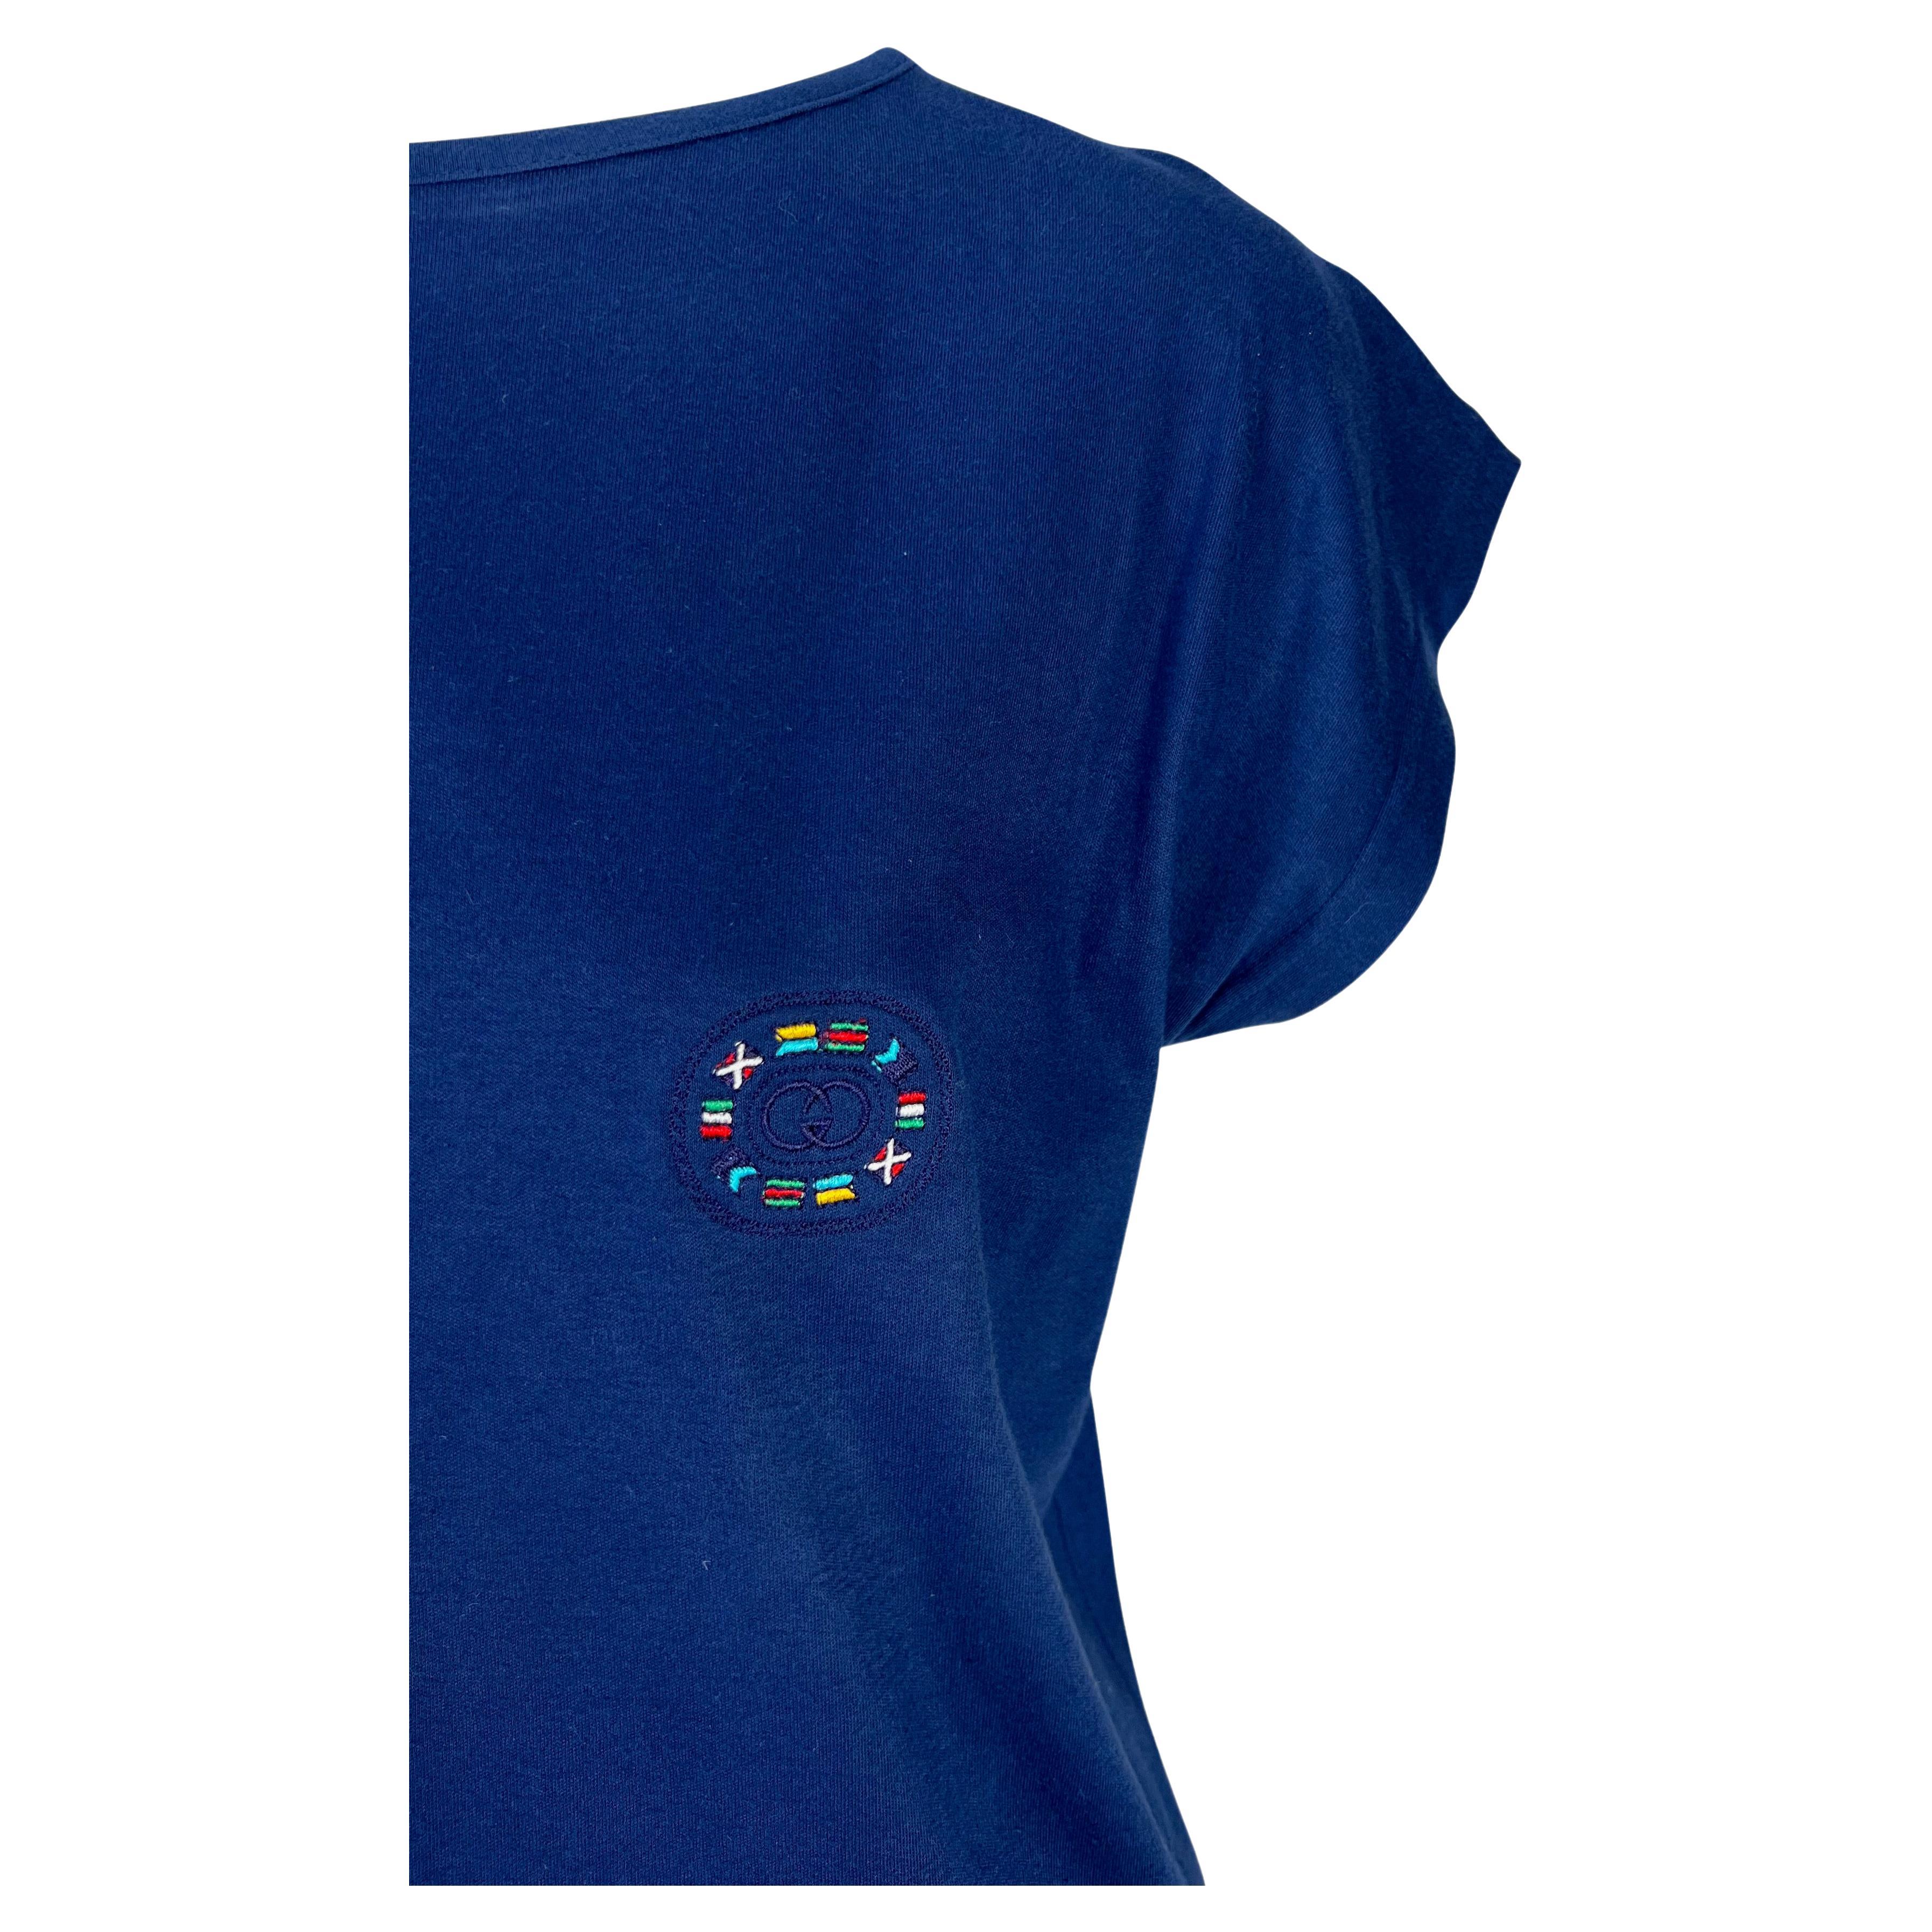 Presenting a navy blue branded Gucci t-shirt. From the 1980s, this t-shirt features a nautical motif with the 'GG' Gucci logo at the bust surrounded by sailing flags. The top is made complete with petal sleeves.

Approximate measurements:
Size -